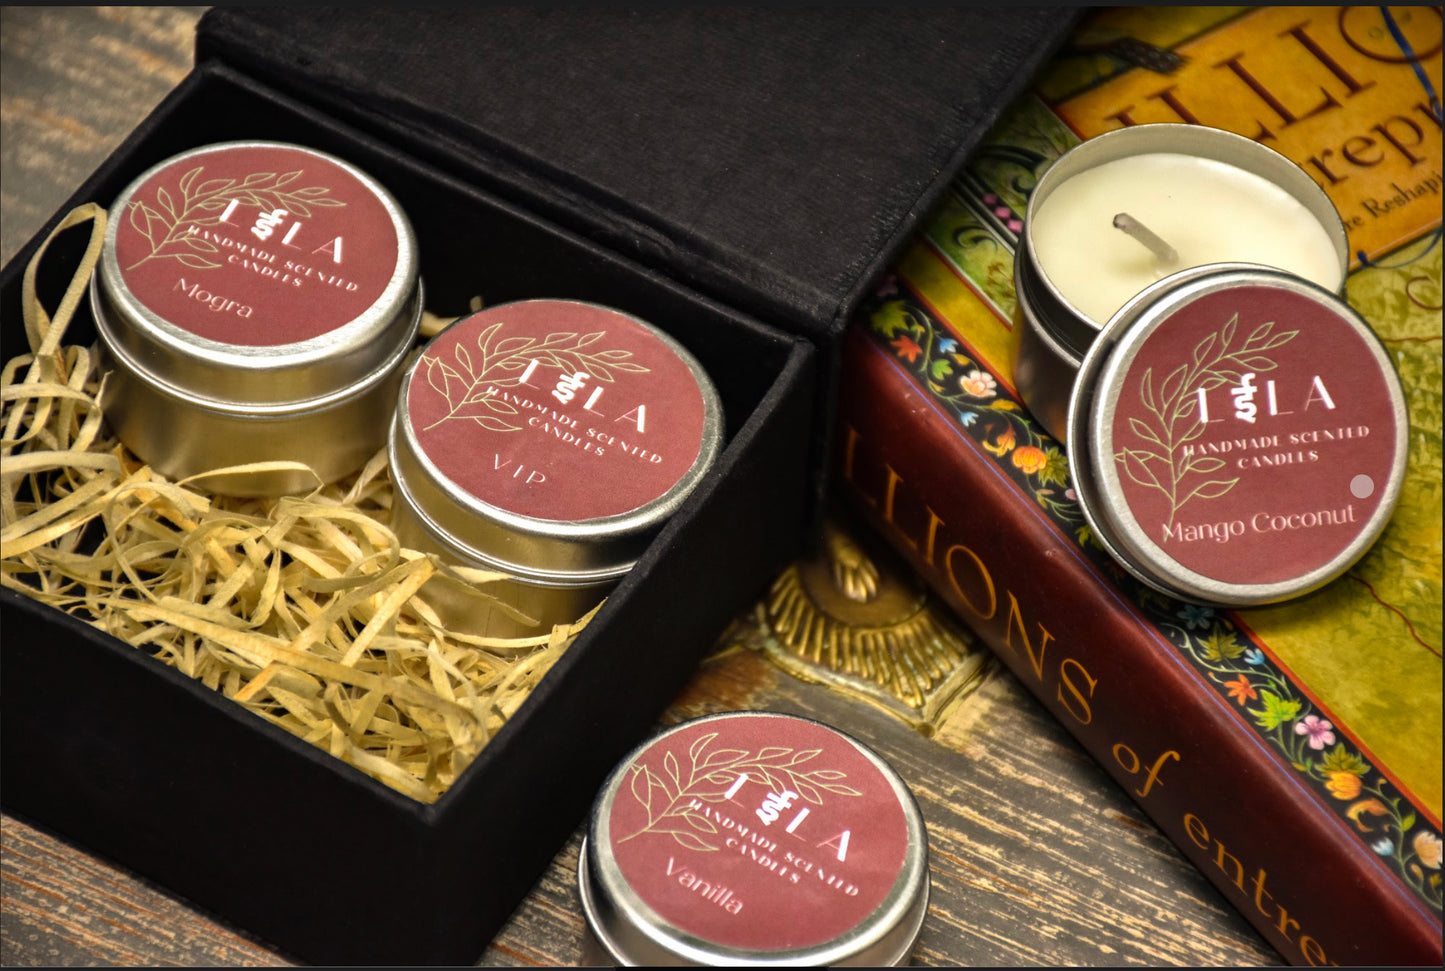 A Set of 4, handpicked and unique scents with scents suchs as mango coconut, mogra, vip & vanilla.